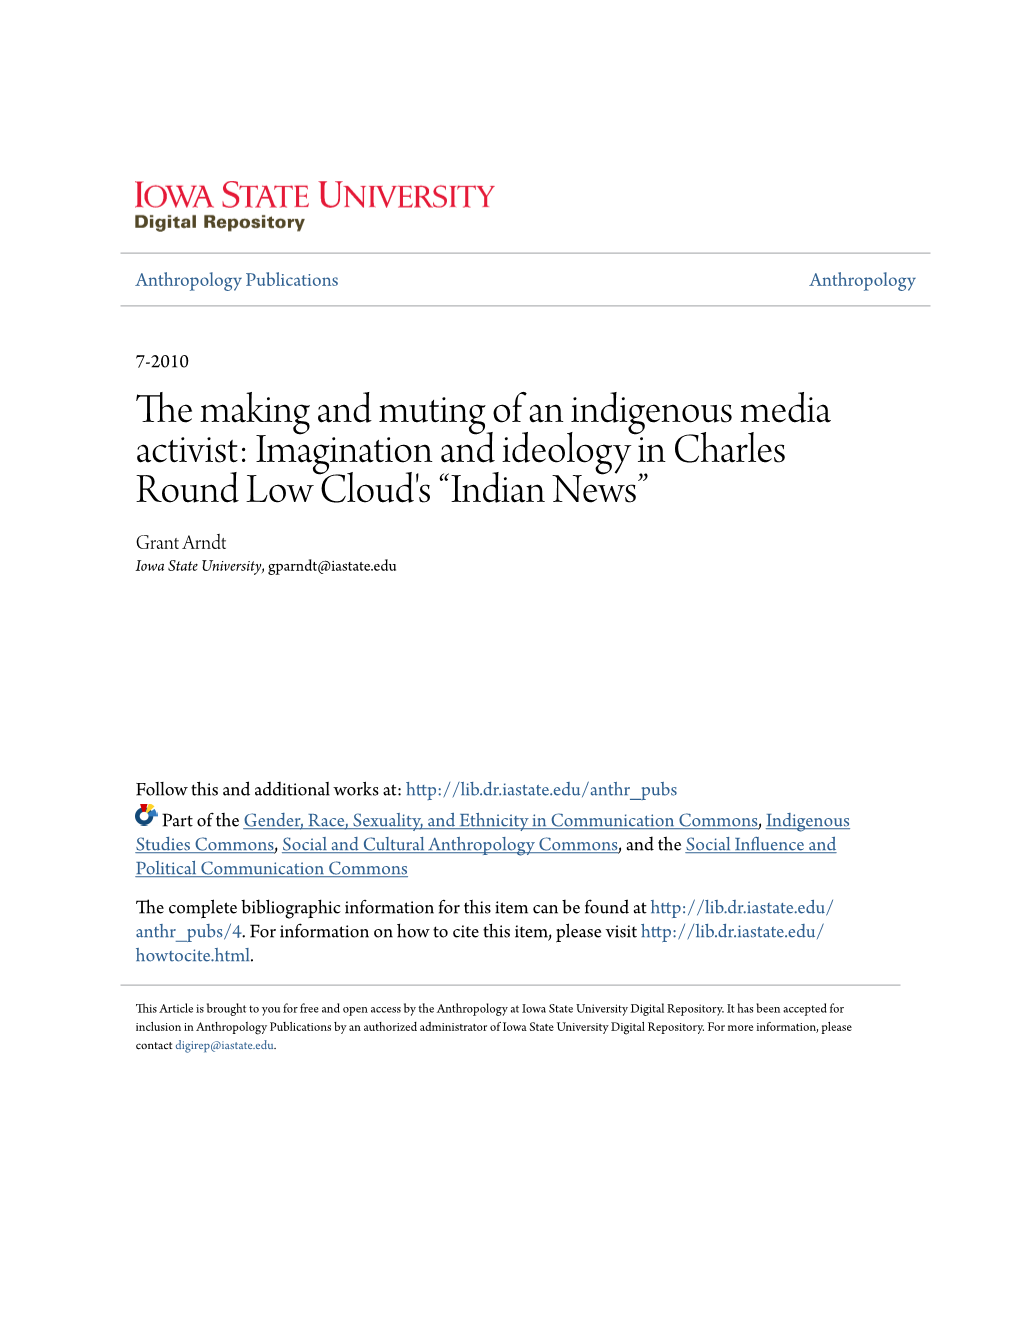 The Making and Muting of an Indigenous Media Activist: Imagination and Ideology in Charles Round Low Cloud’S “Indian News”